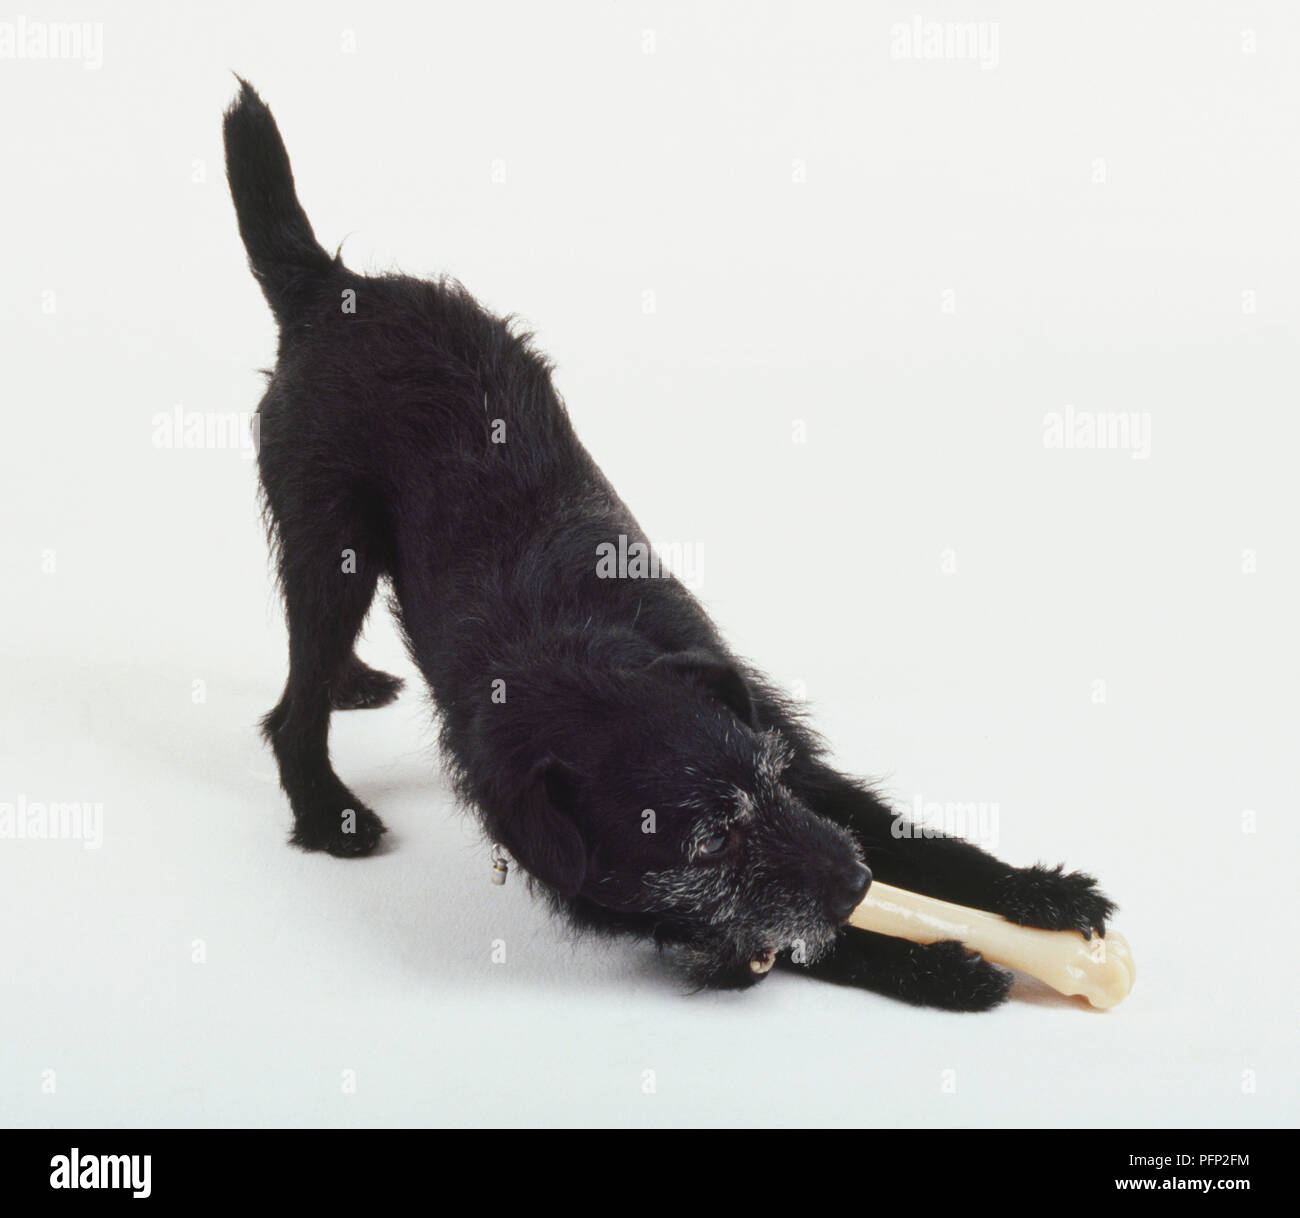 A shaggy black dog chews on a cylindrical bone or toy while crouching with its hind quarters in the air. Stock Photo